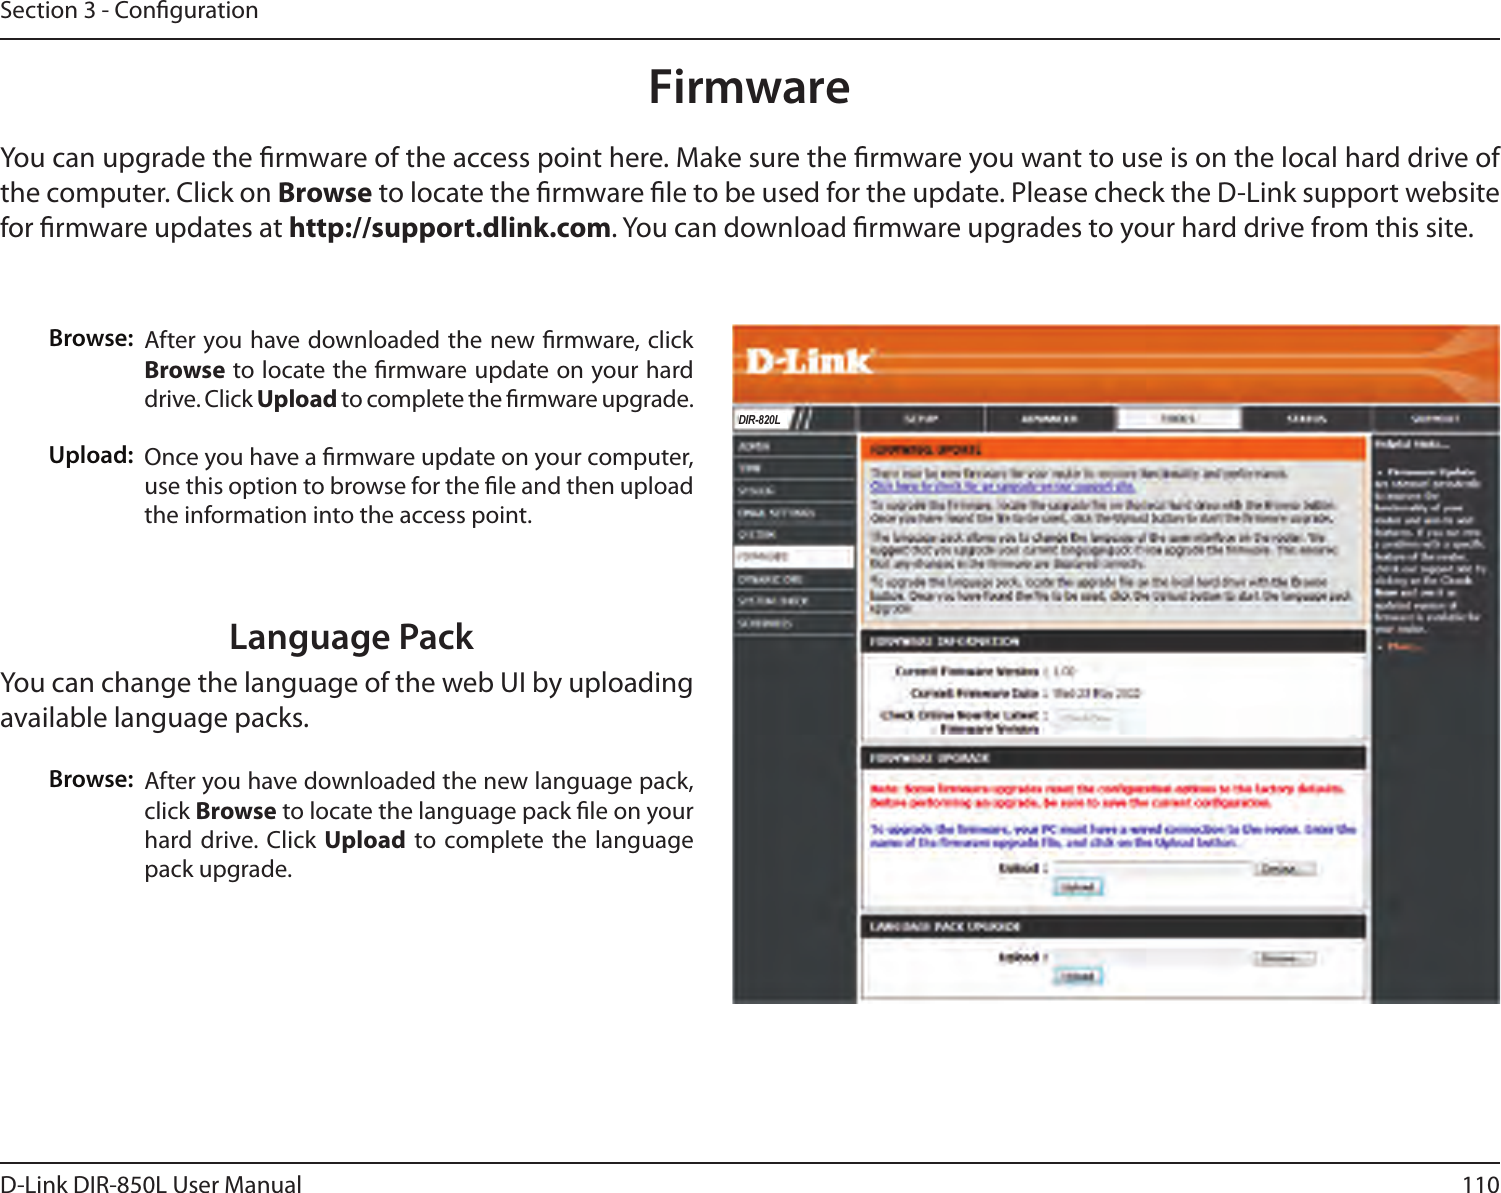 110D-Link DIR-850L User ManualSection 3 - CongurationFirmwareBrowse:Upload:After you have downloaded the new rmware, click Browse to locate the rmware update on your hard drive. Click Upload to complete the rmware upgrade.Once you have a rmware update on your computer, use this option to browse for the le and then upload the information into the access point. You can upgrade the rmware of the access point here. Make sure the rmware you want to use is on the local hard drive of the computer. Click on Browse to locate the rmware le to be used for the update. Please check the D-Link support website for rmware updates at http://support.dlink.com. You can download rmware upgrades to your hard drive from this site.After you have downloaded the new language pack, click Browse to locate the language pack le on your hard drive. Click Upload  to complete the language pack upgrade.Language PackYou can change the language of the web UI by uploading available language packs.Browse:DIR-820L